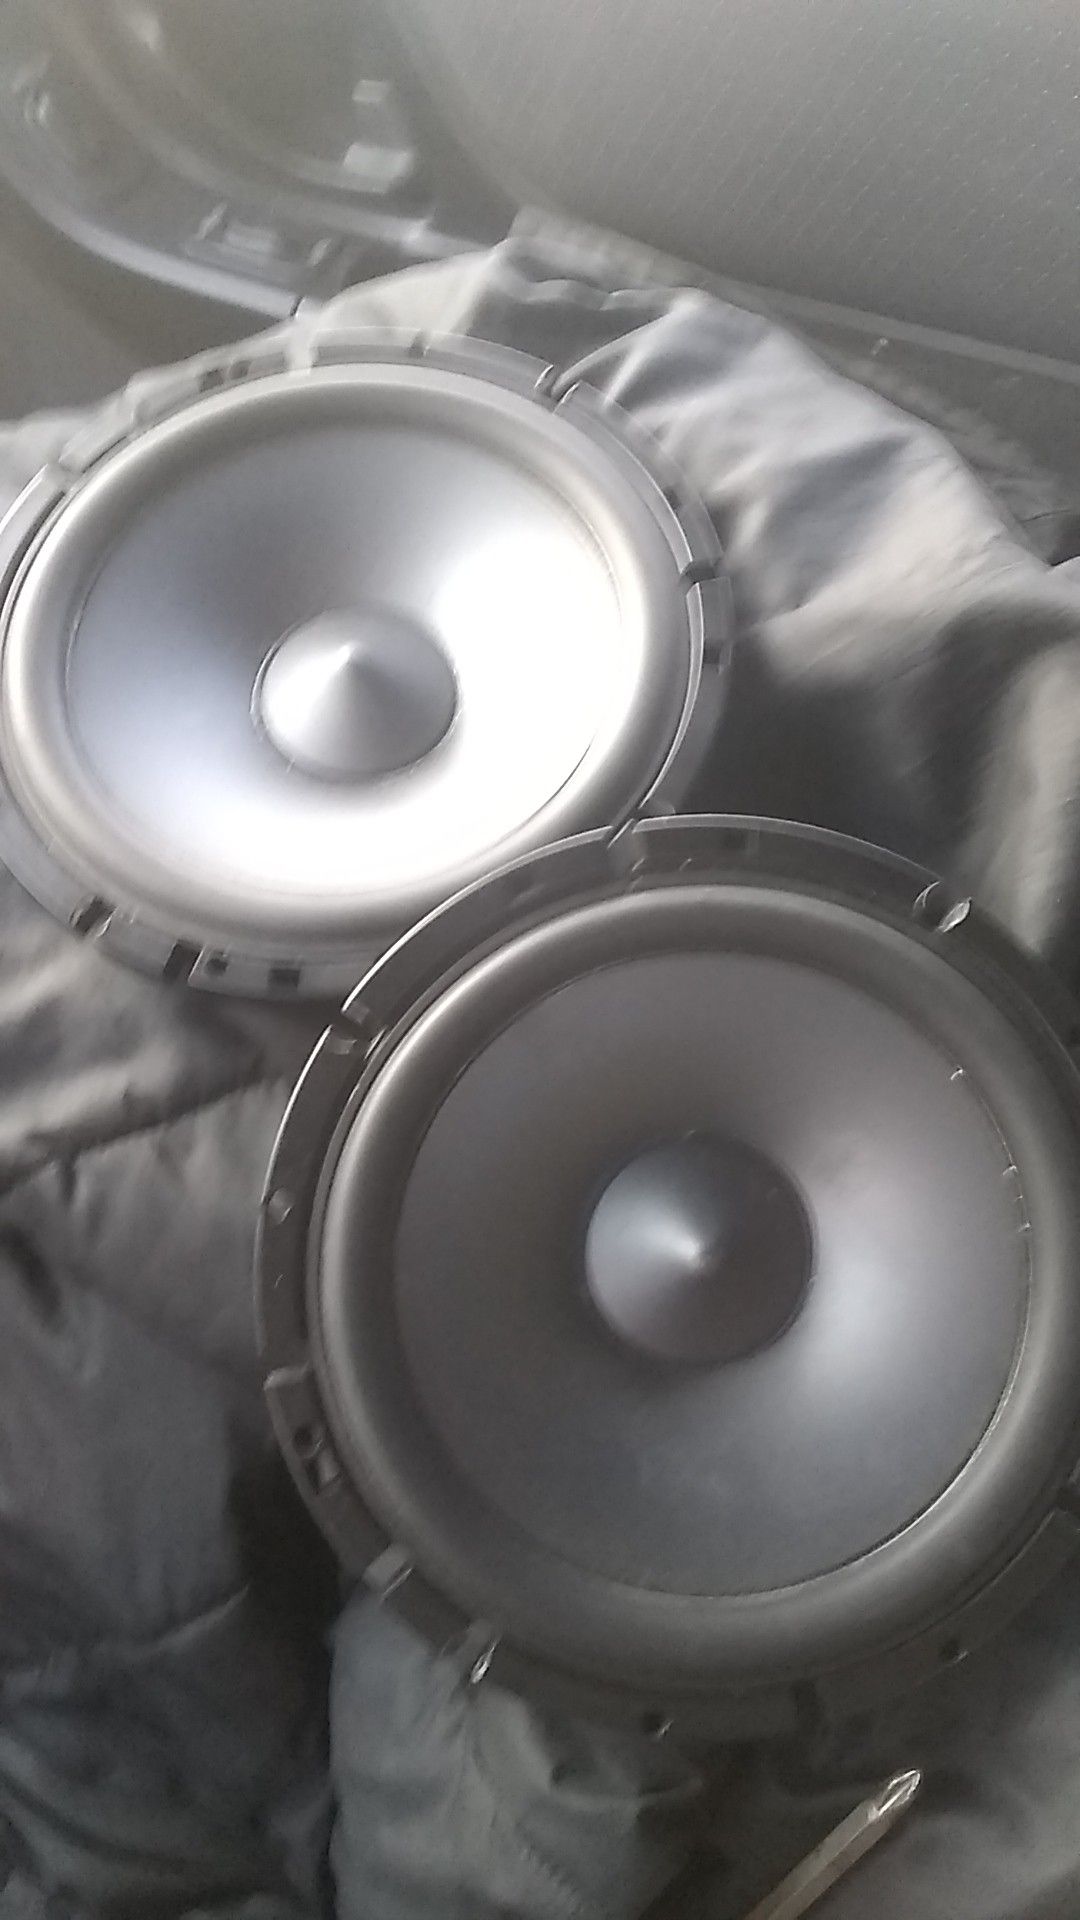 Alpine type s 6.5 component midbass speakers with built in crossovers